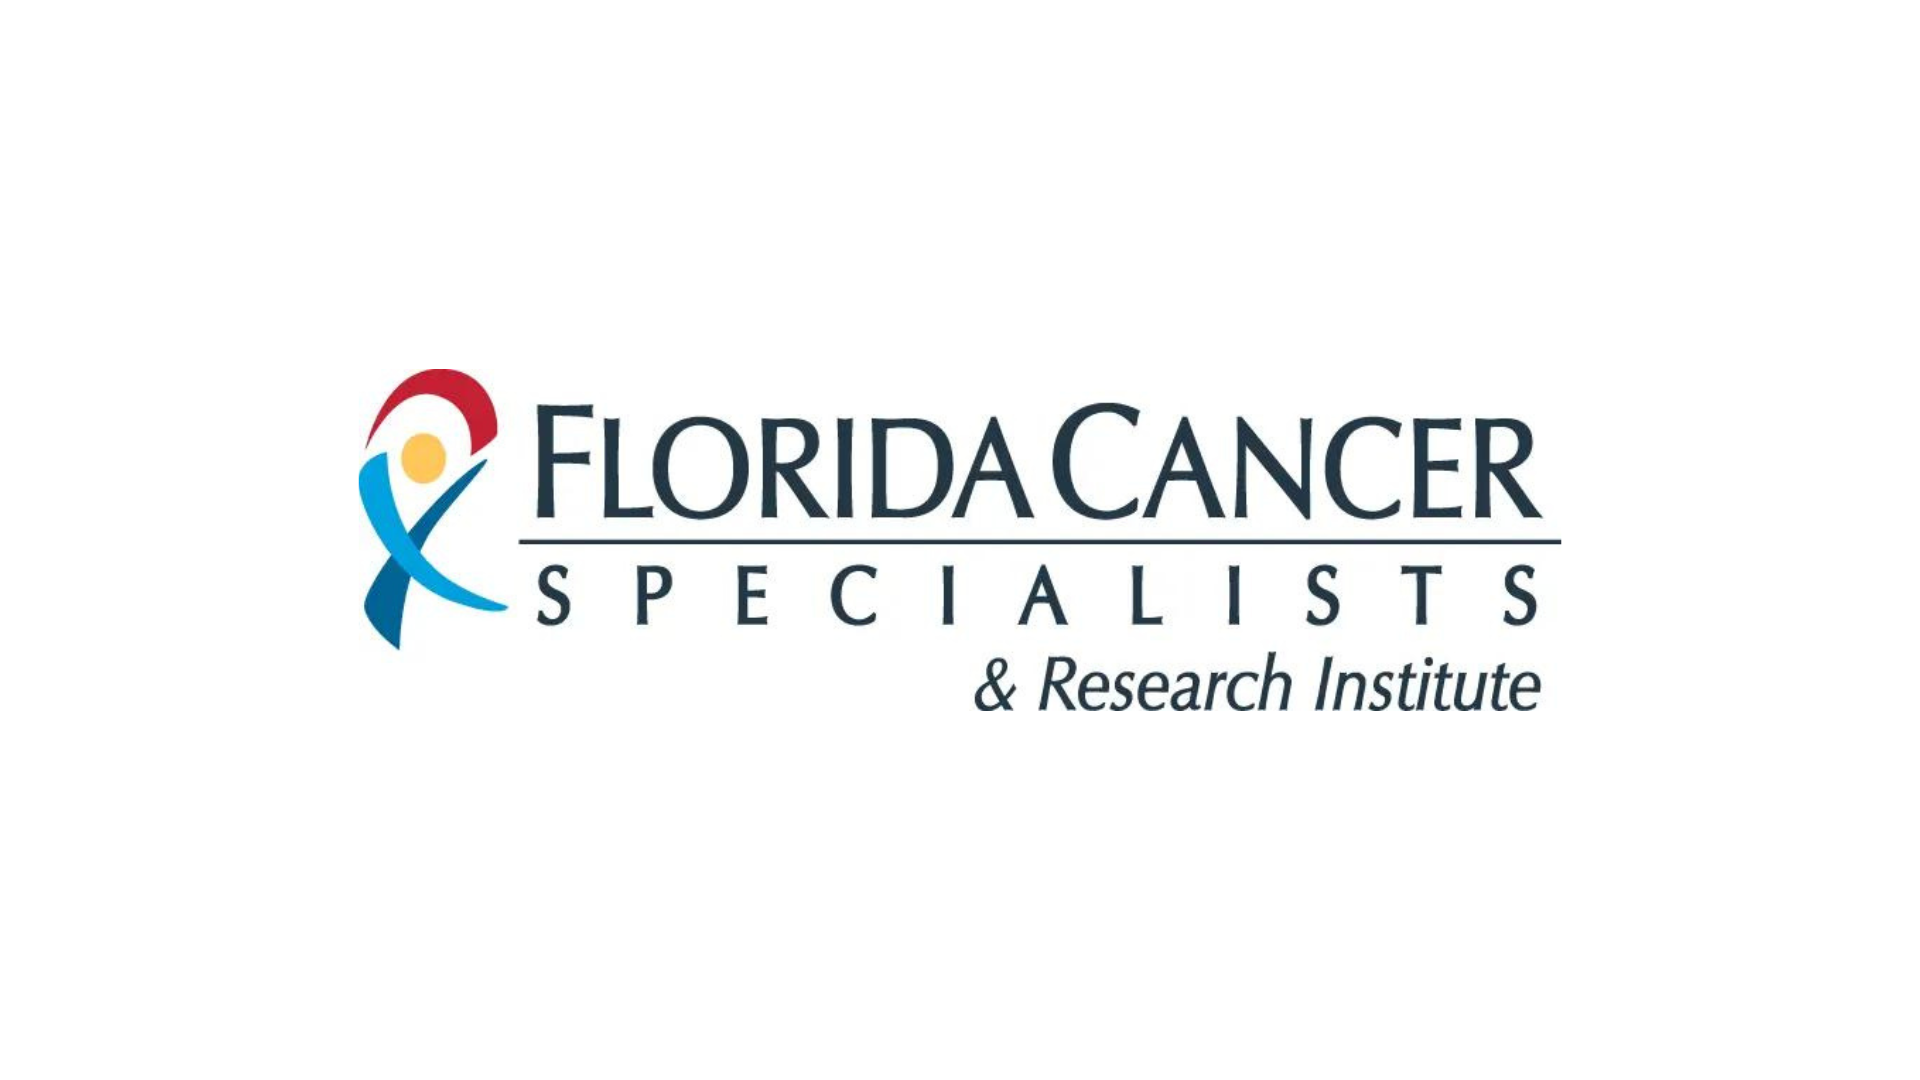 Florida Cancer Specialists & Research Institute Research Breakthroughs Presented at Global Hematology Gathering